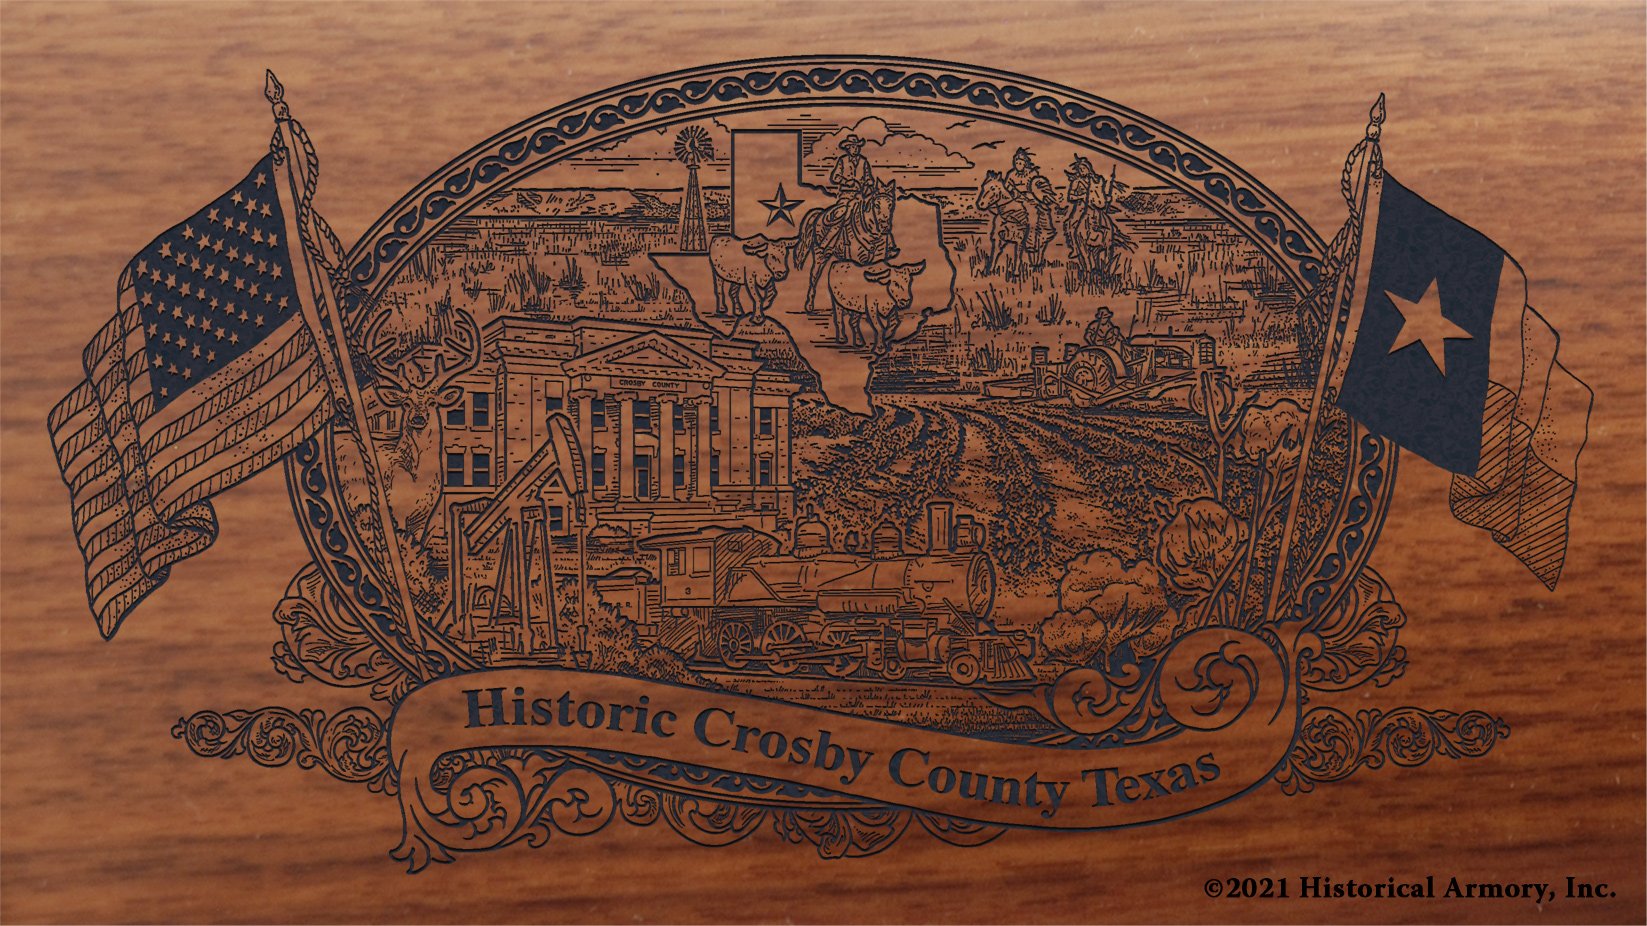 Engraved artwork | History of Crosby County Texas | Historical Armory